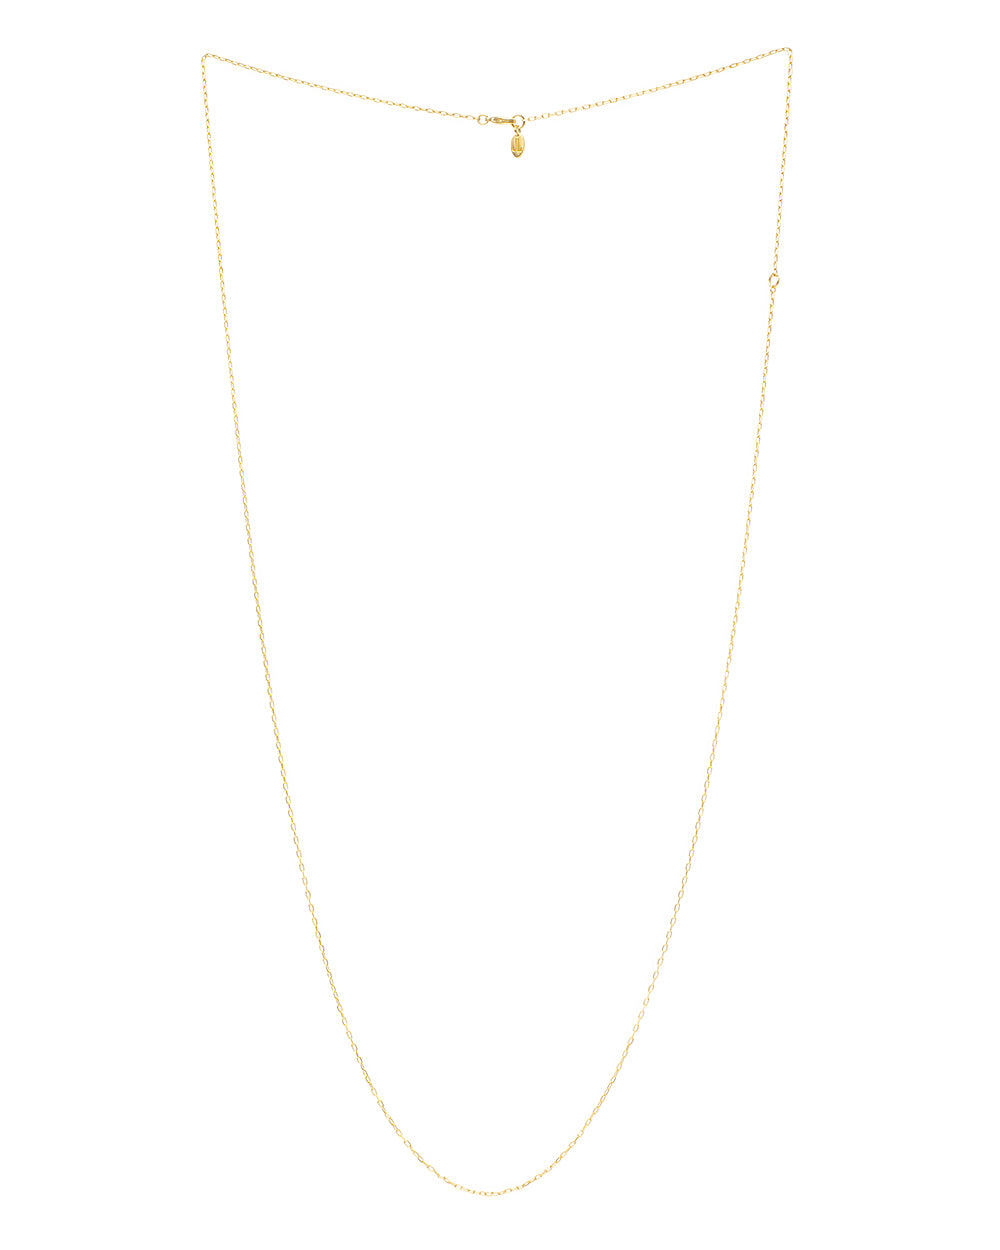 K24 Anchor weaving necklace made of brass plated with 24K gold / length 75-90 cm